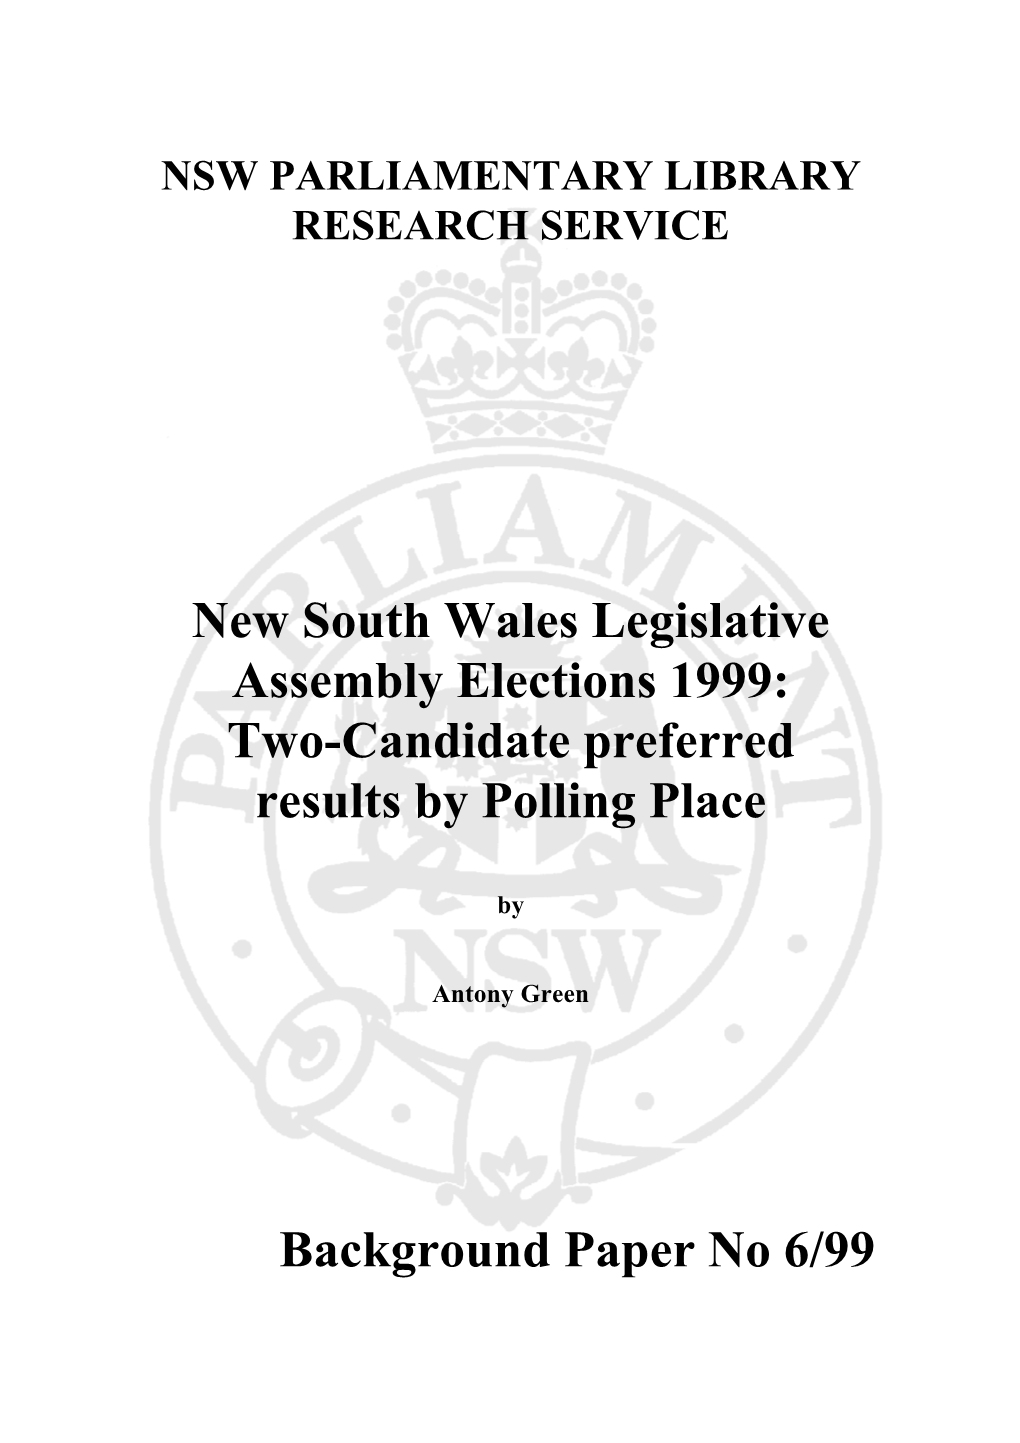 New South Wales Legislative Assembly Elections 1999: Two-Candidate Preferred Results by Polling Place